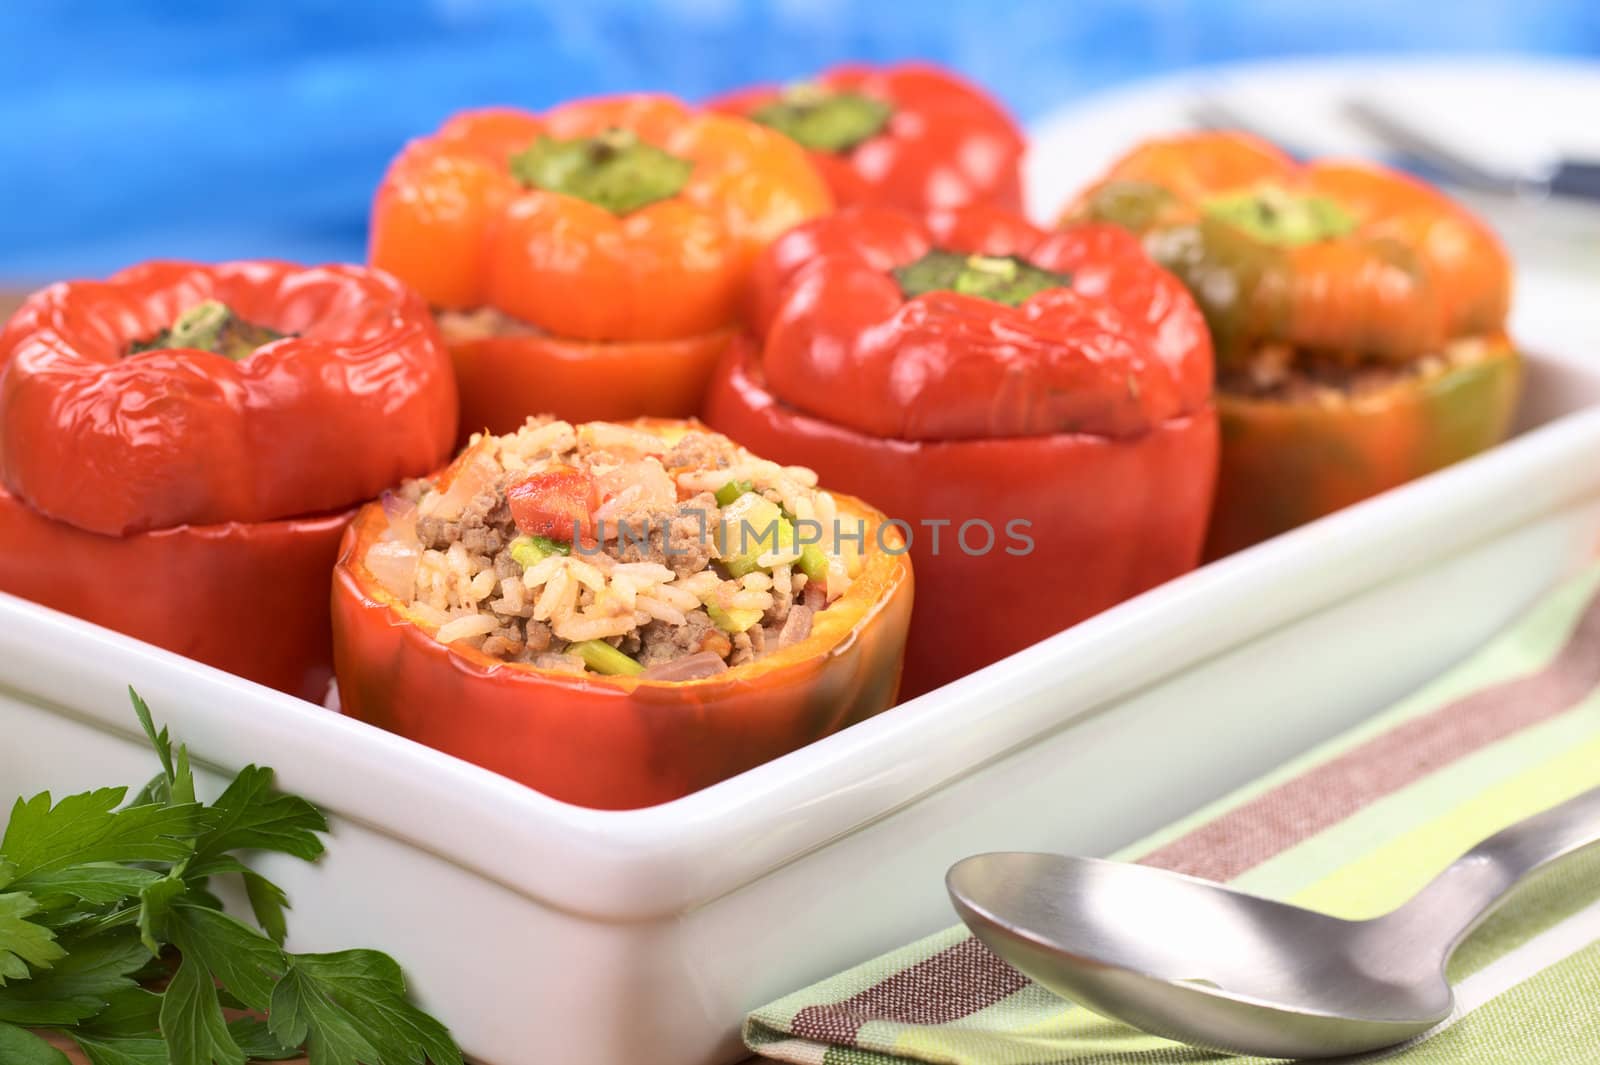 Baked stuffed red bell pepper filled with minced meat, onion, rice, tomato and green onion in a casserole (Selective Focus, Focus on the front of the stuffing)